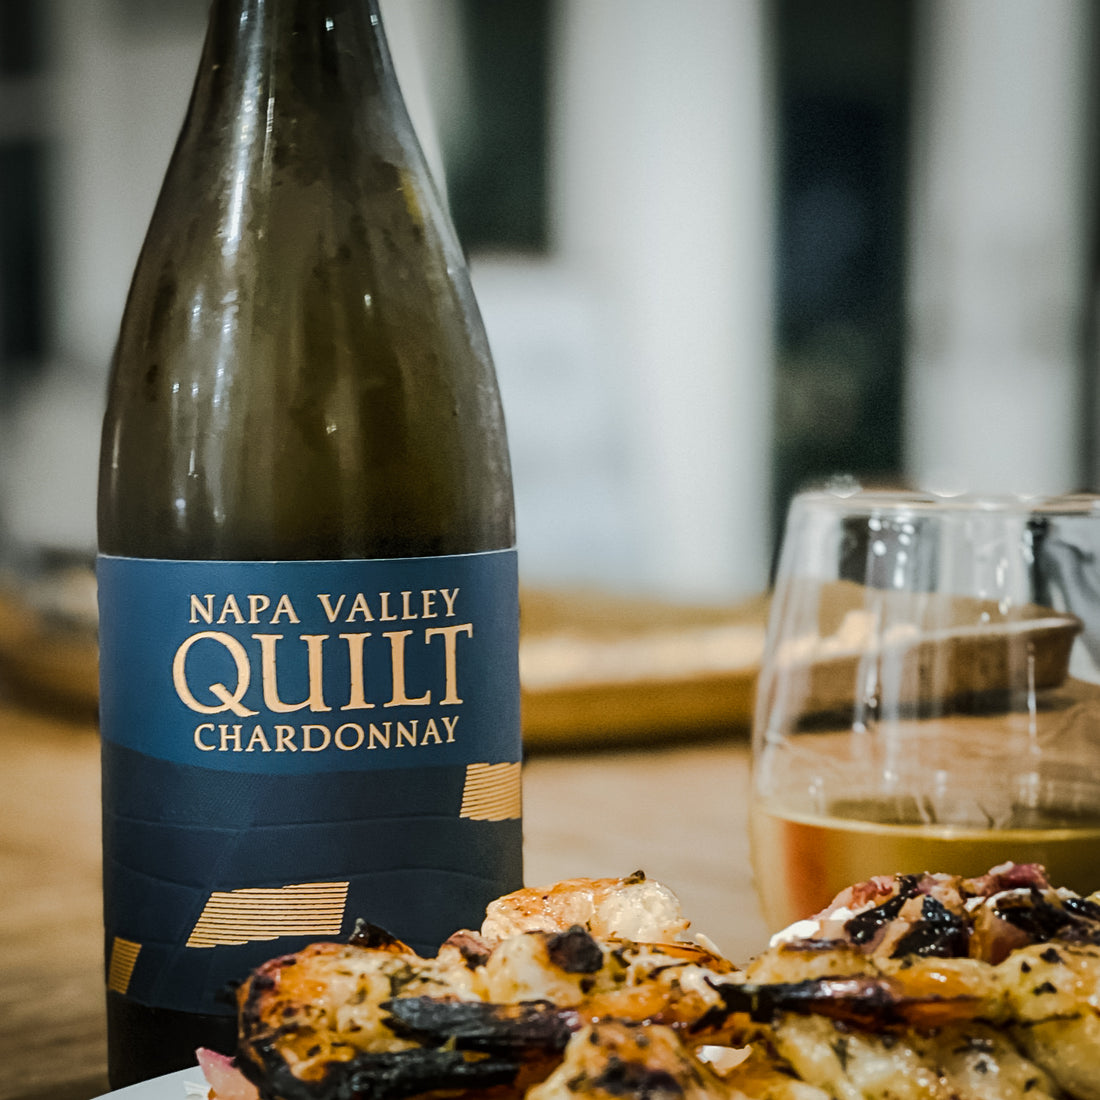 Napa Valley Quilt Chardonnay and Grilled Shrimp